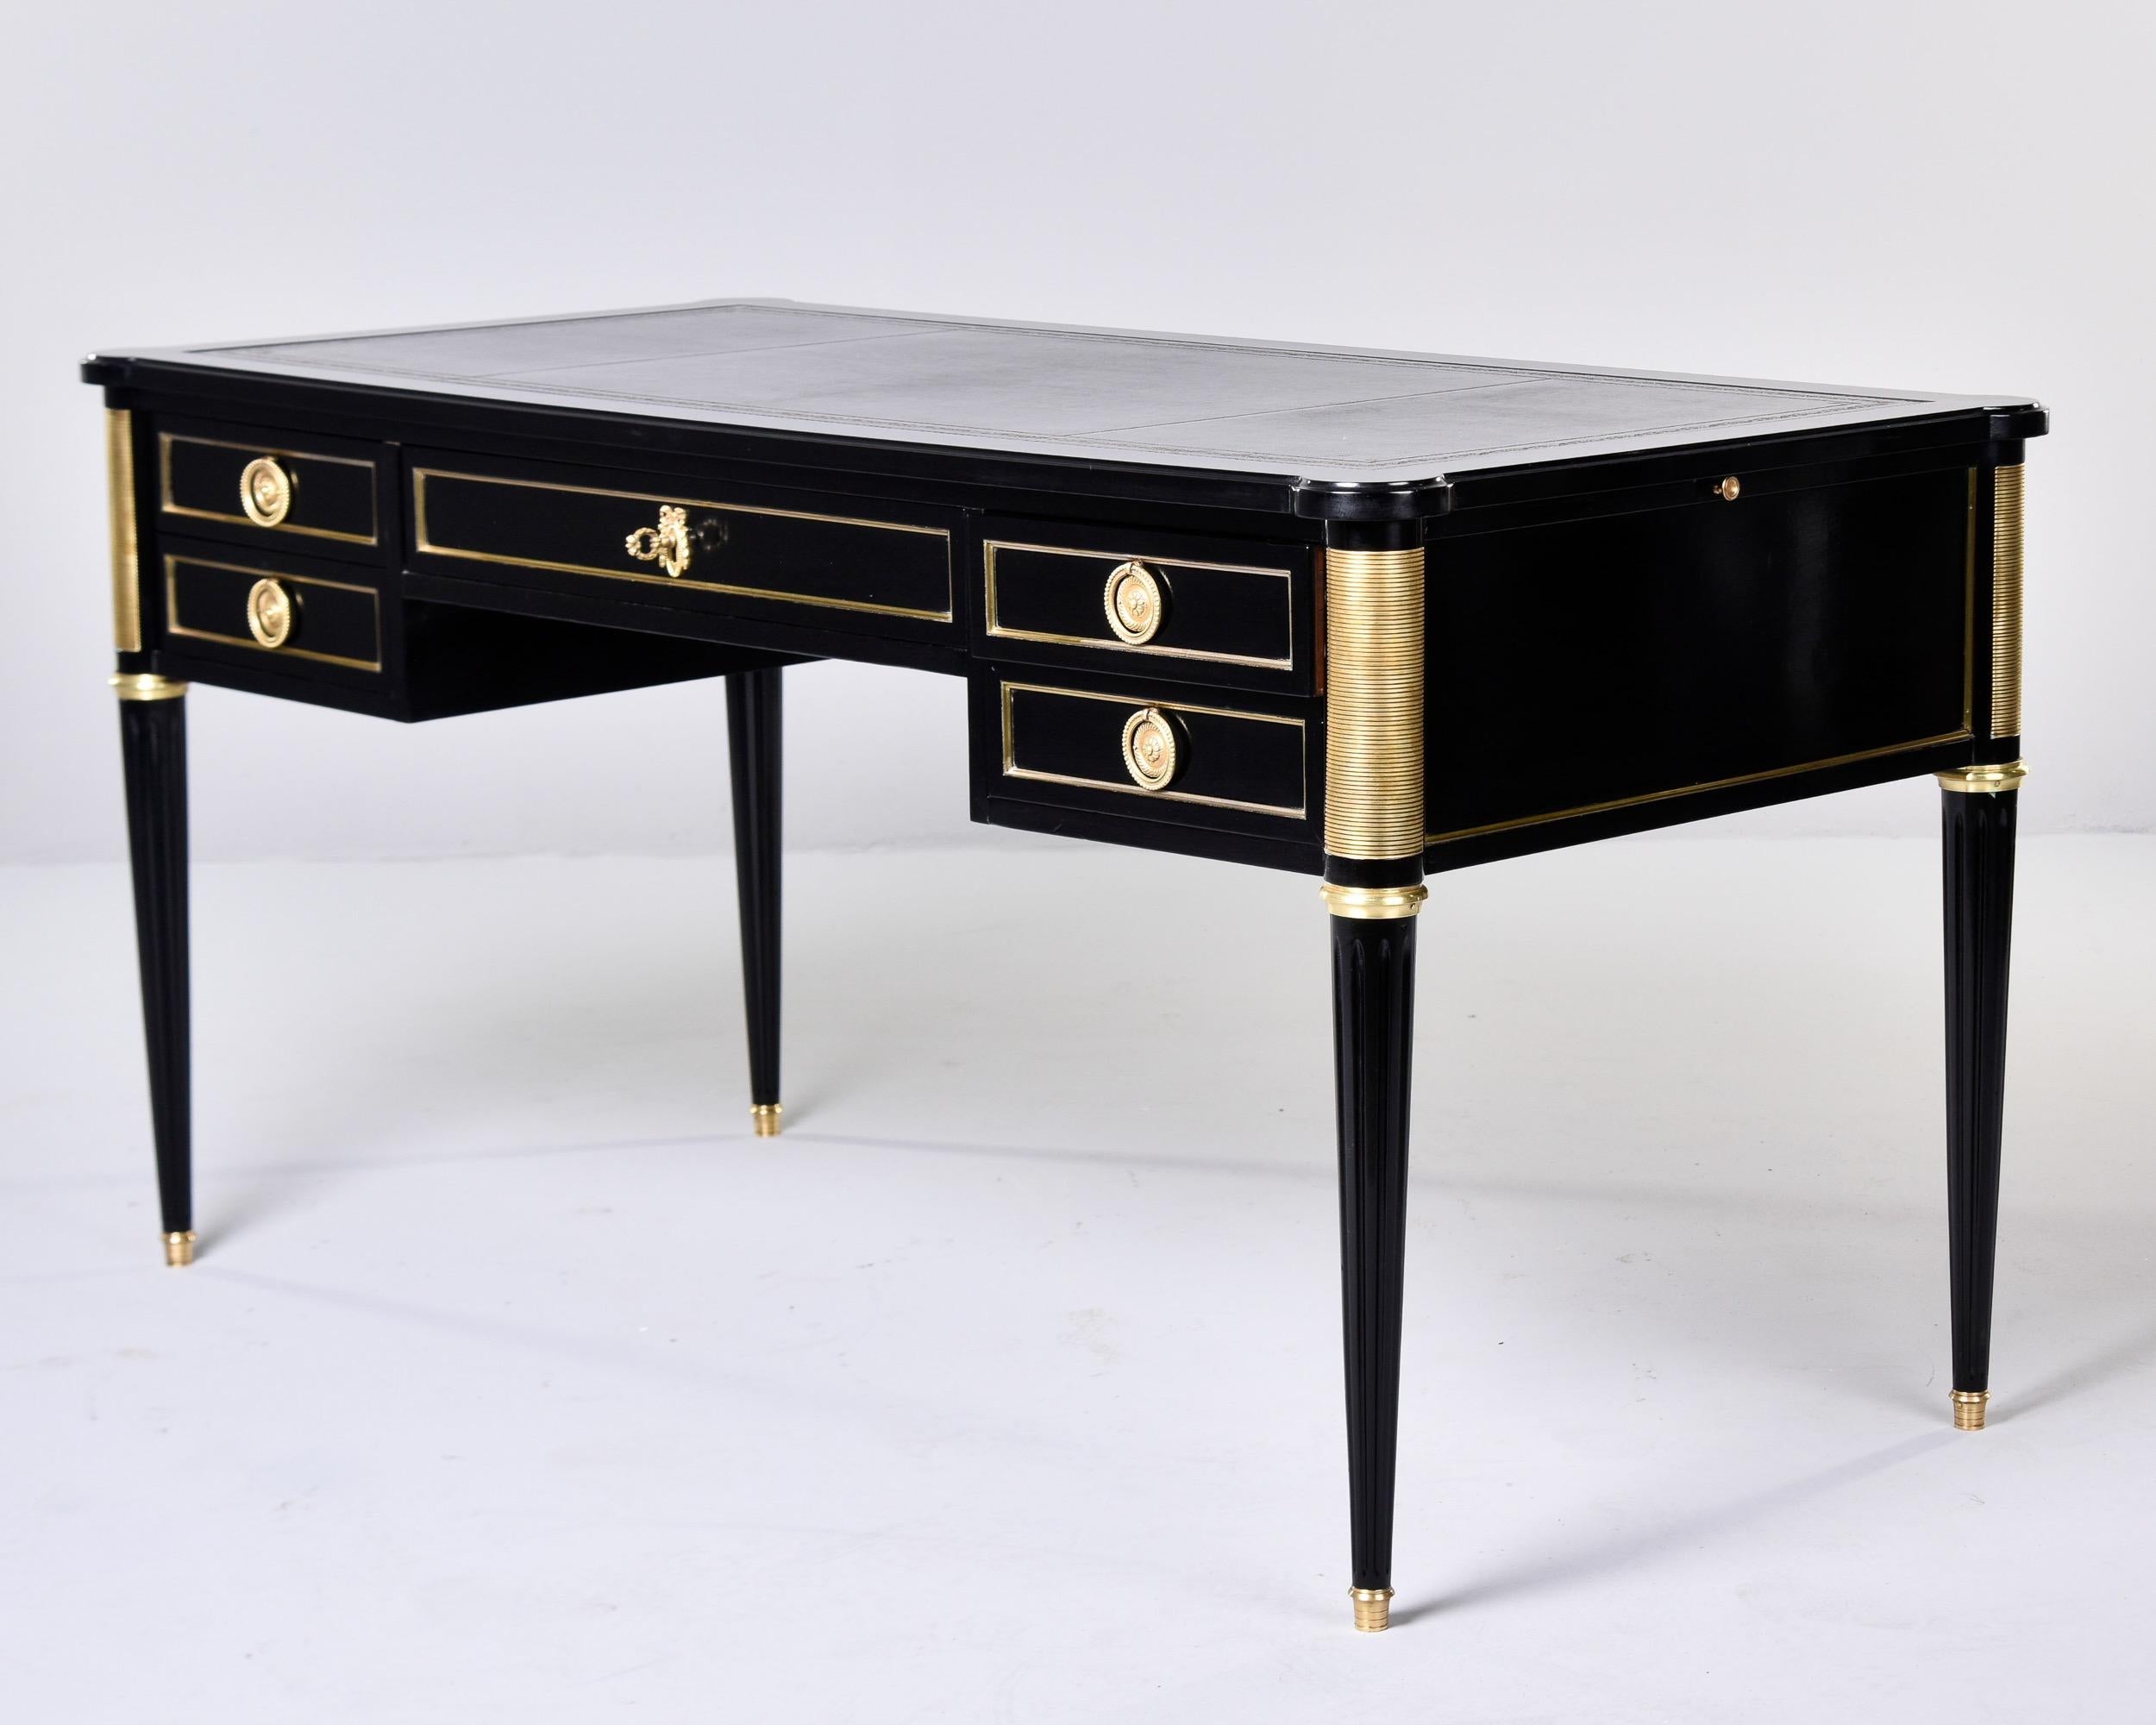 19th C Louis XVI Style Ebonised Desk with Brass Mounts and New Leather Top  For Sale 3